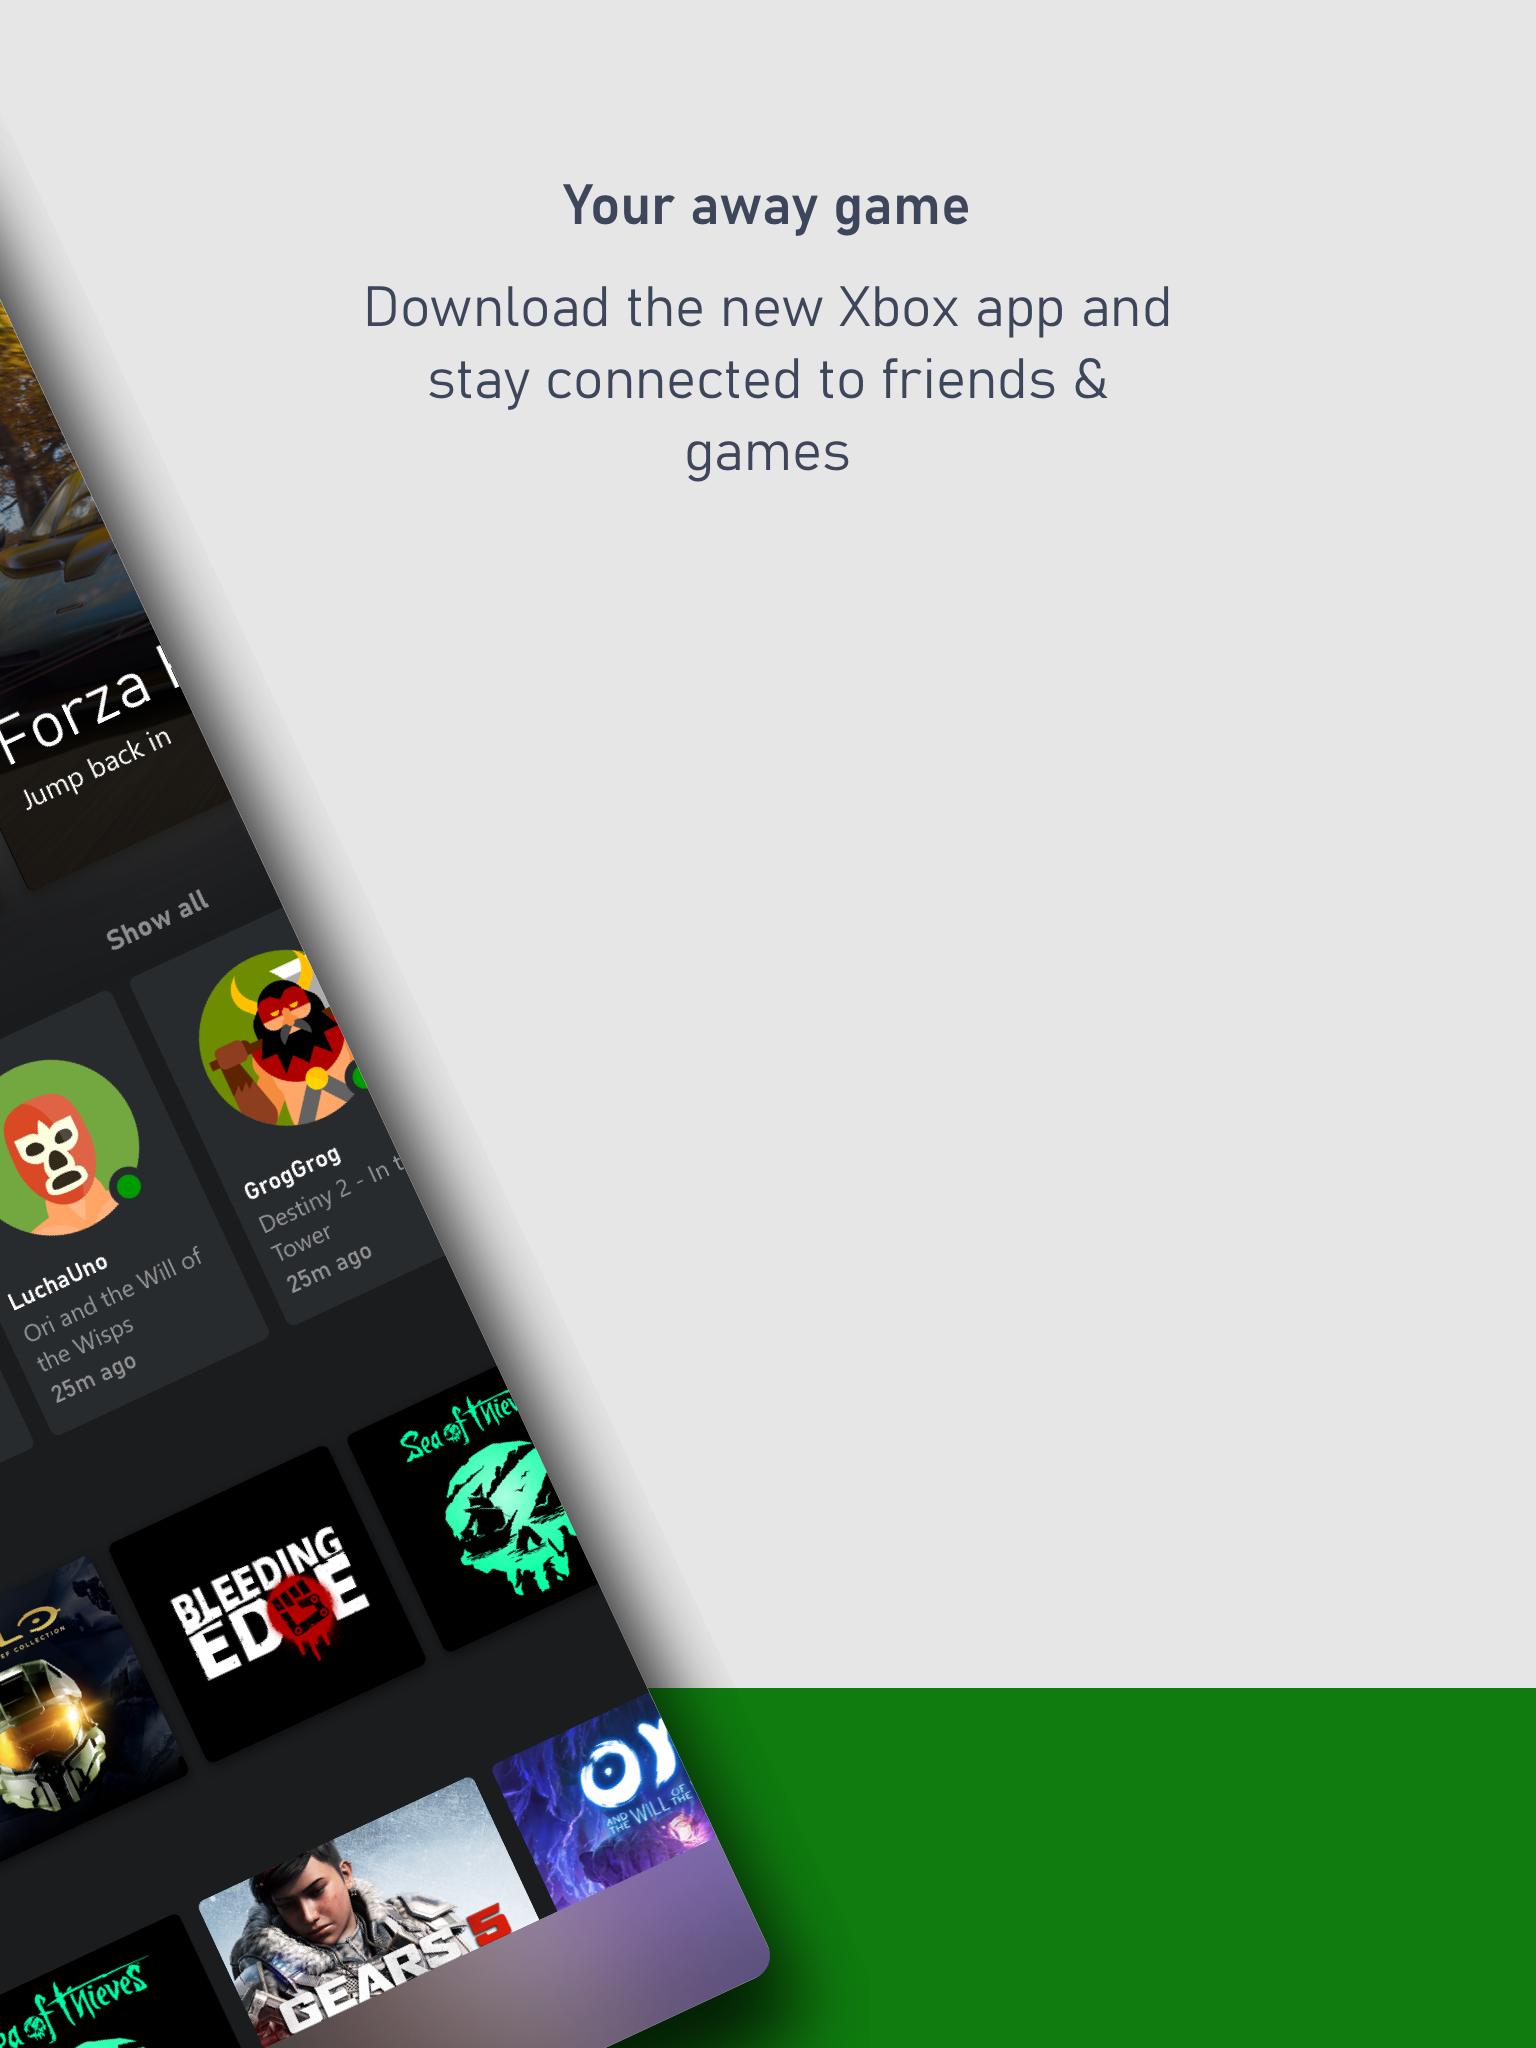 M Bx13s7xjr Om - flipboard roblox xbox one app launches with 15 community